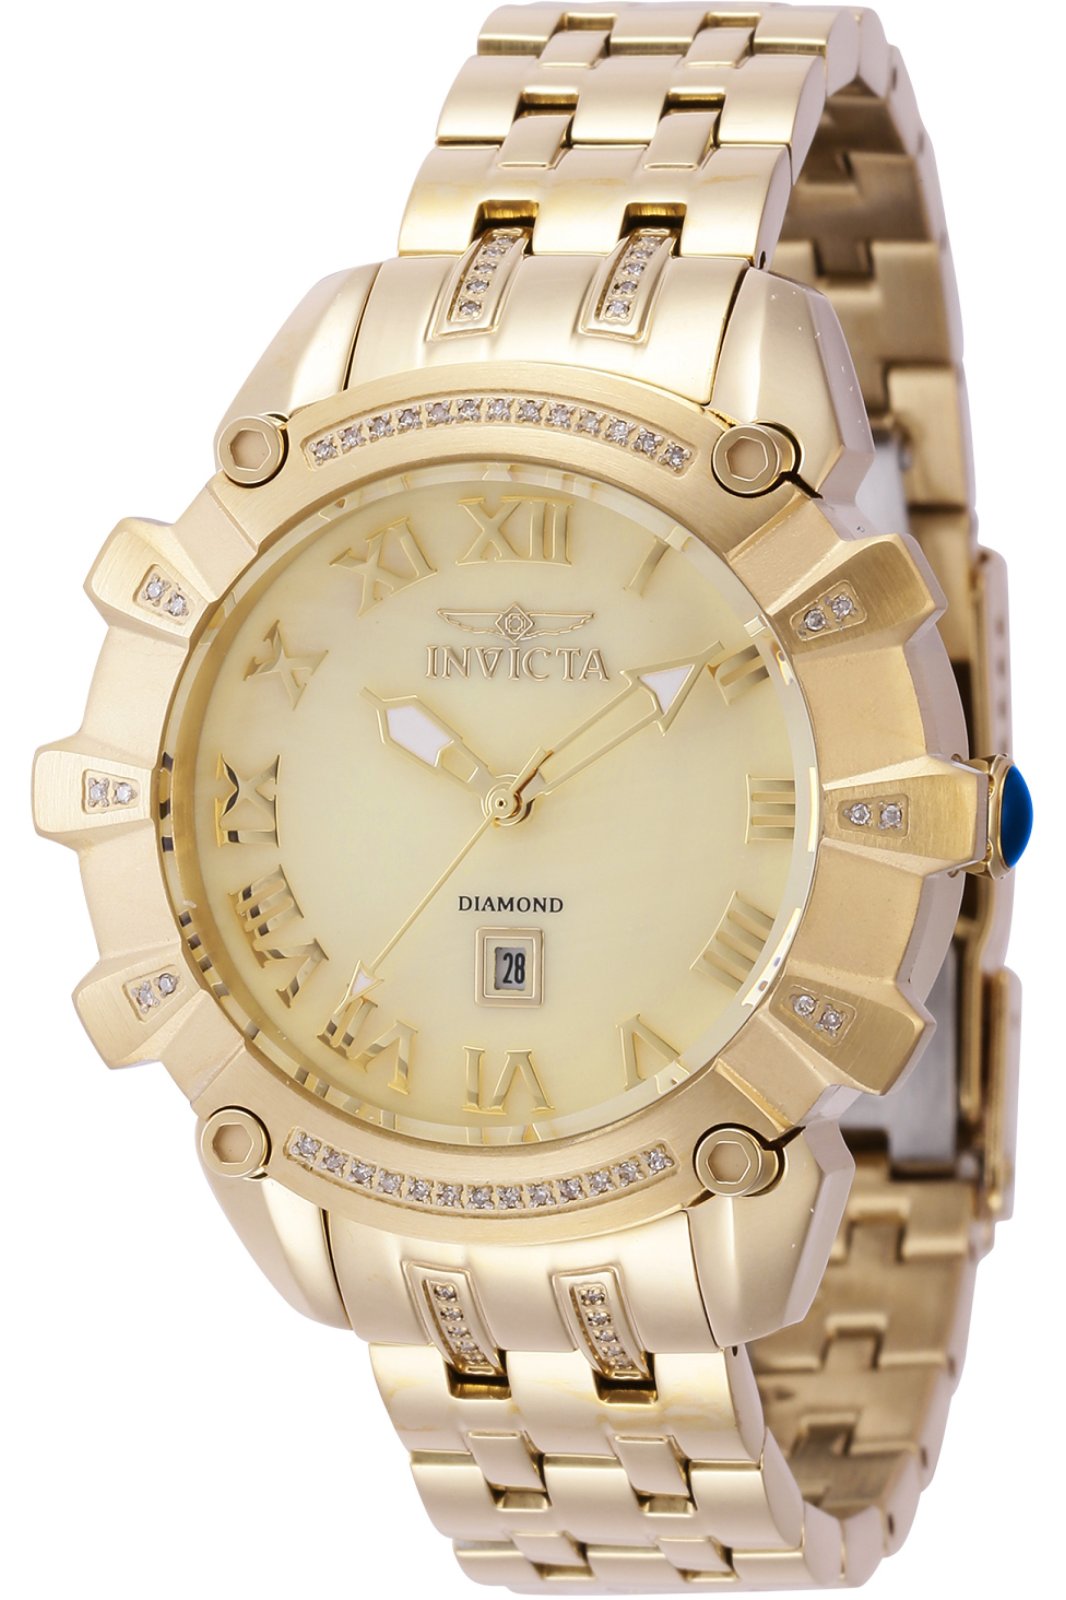 Invicta Watch Angel 42307 Official Invicta Store Buy Online!